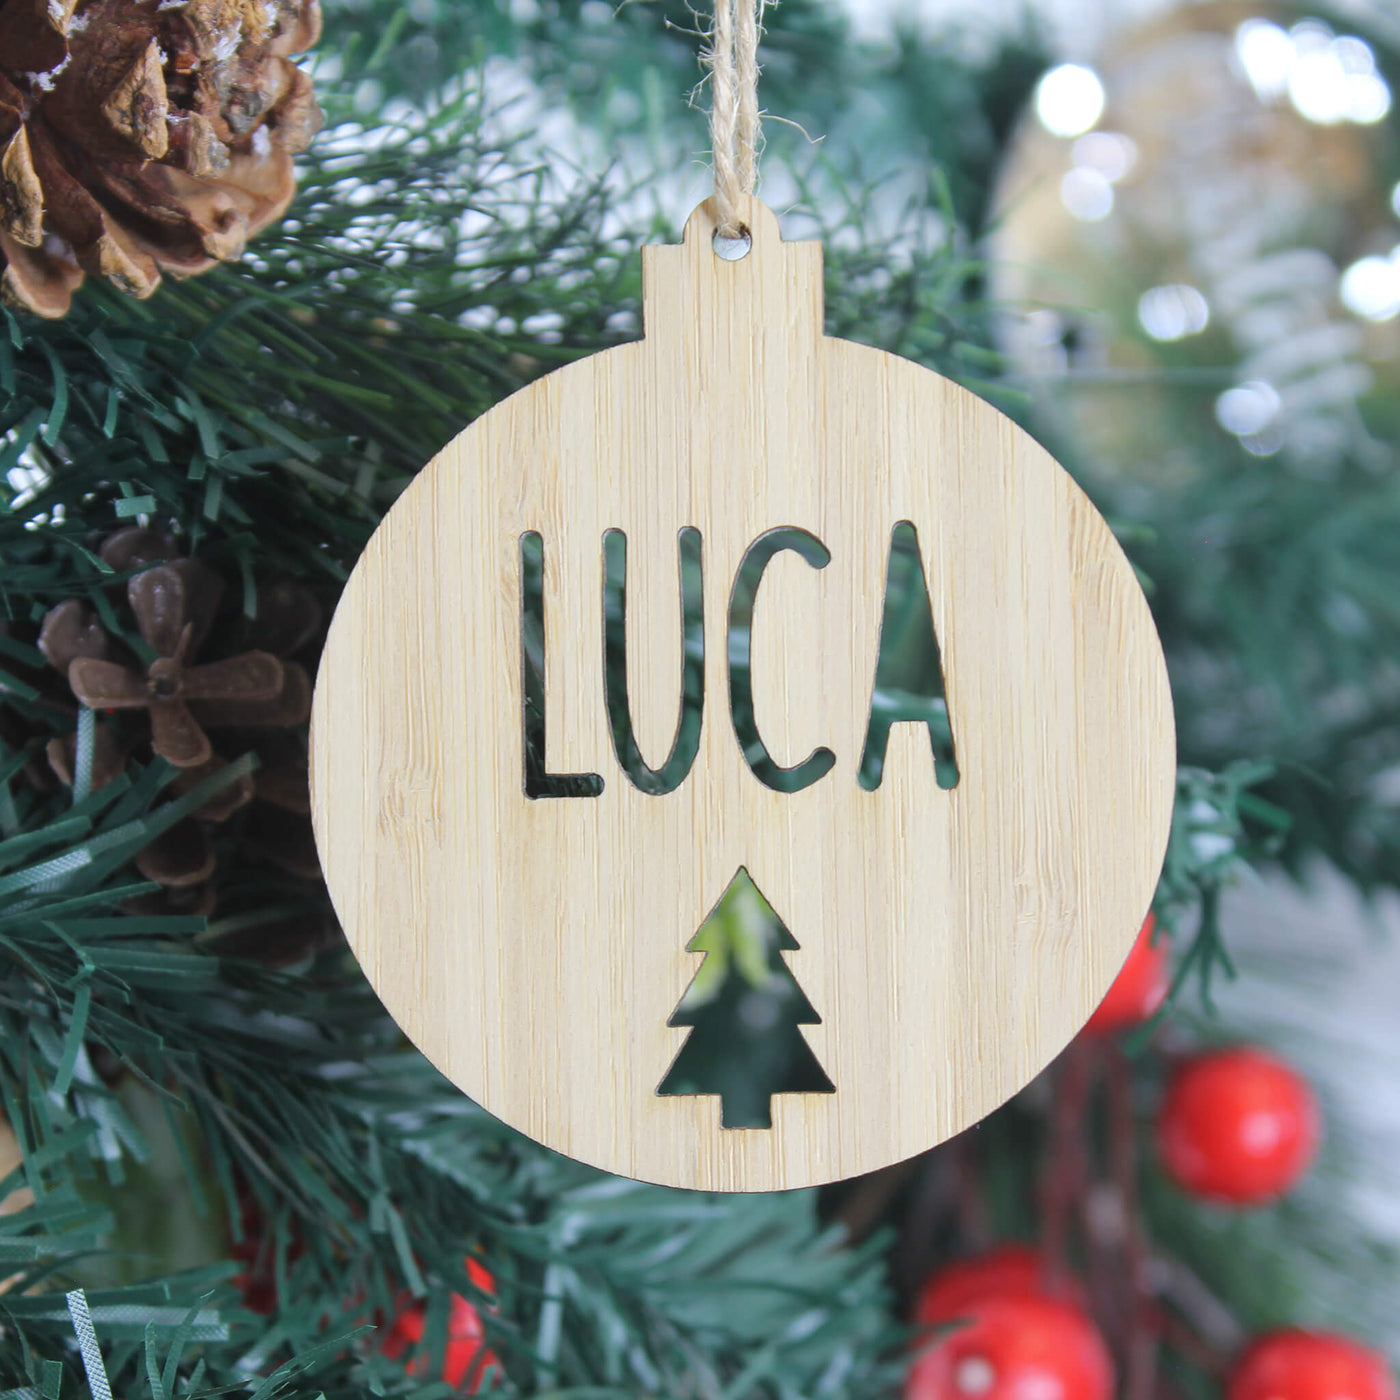 Personalised wooden Christmas ornaments australia